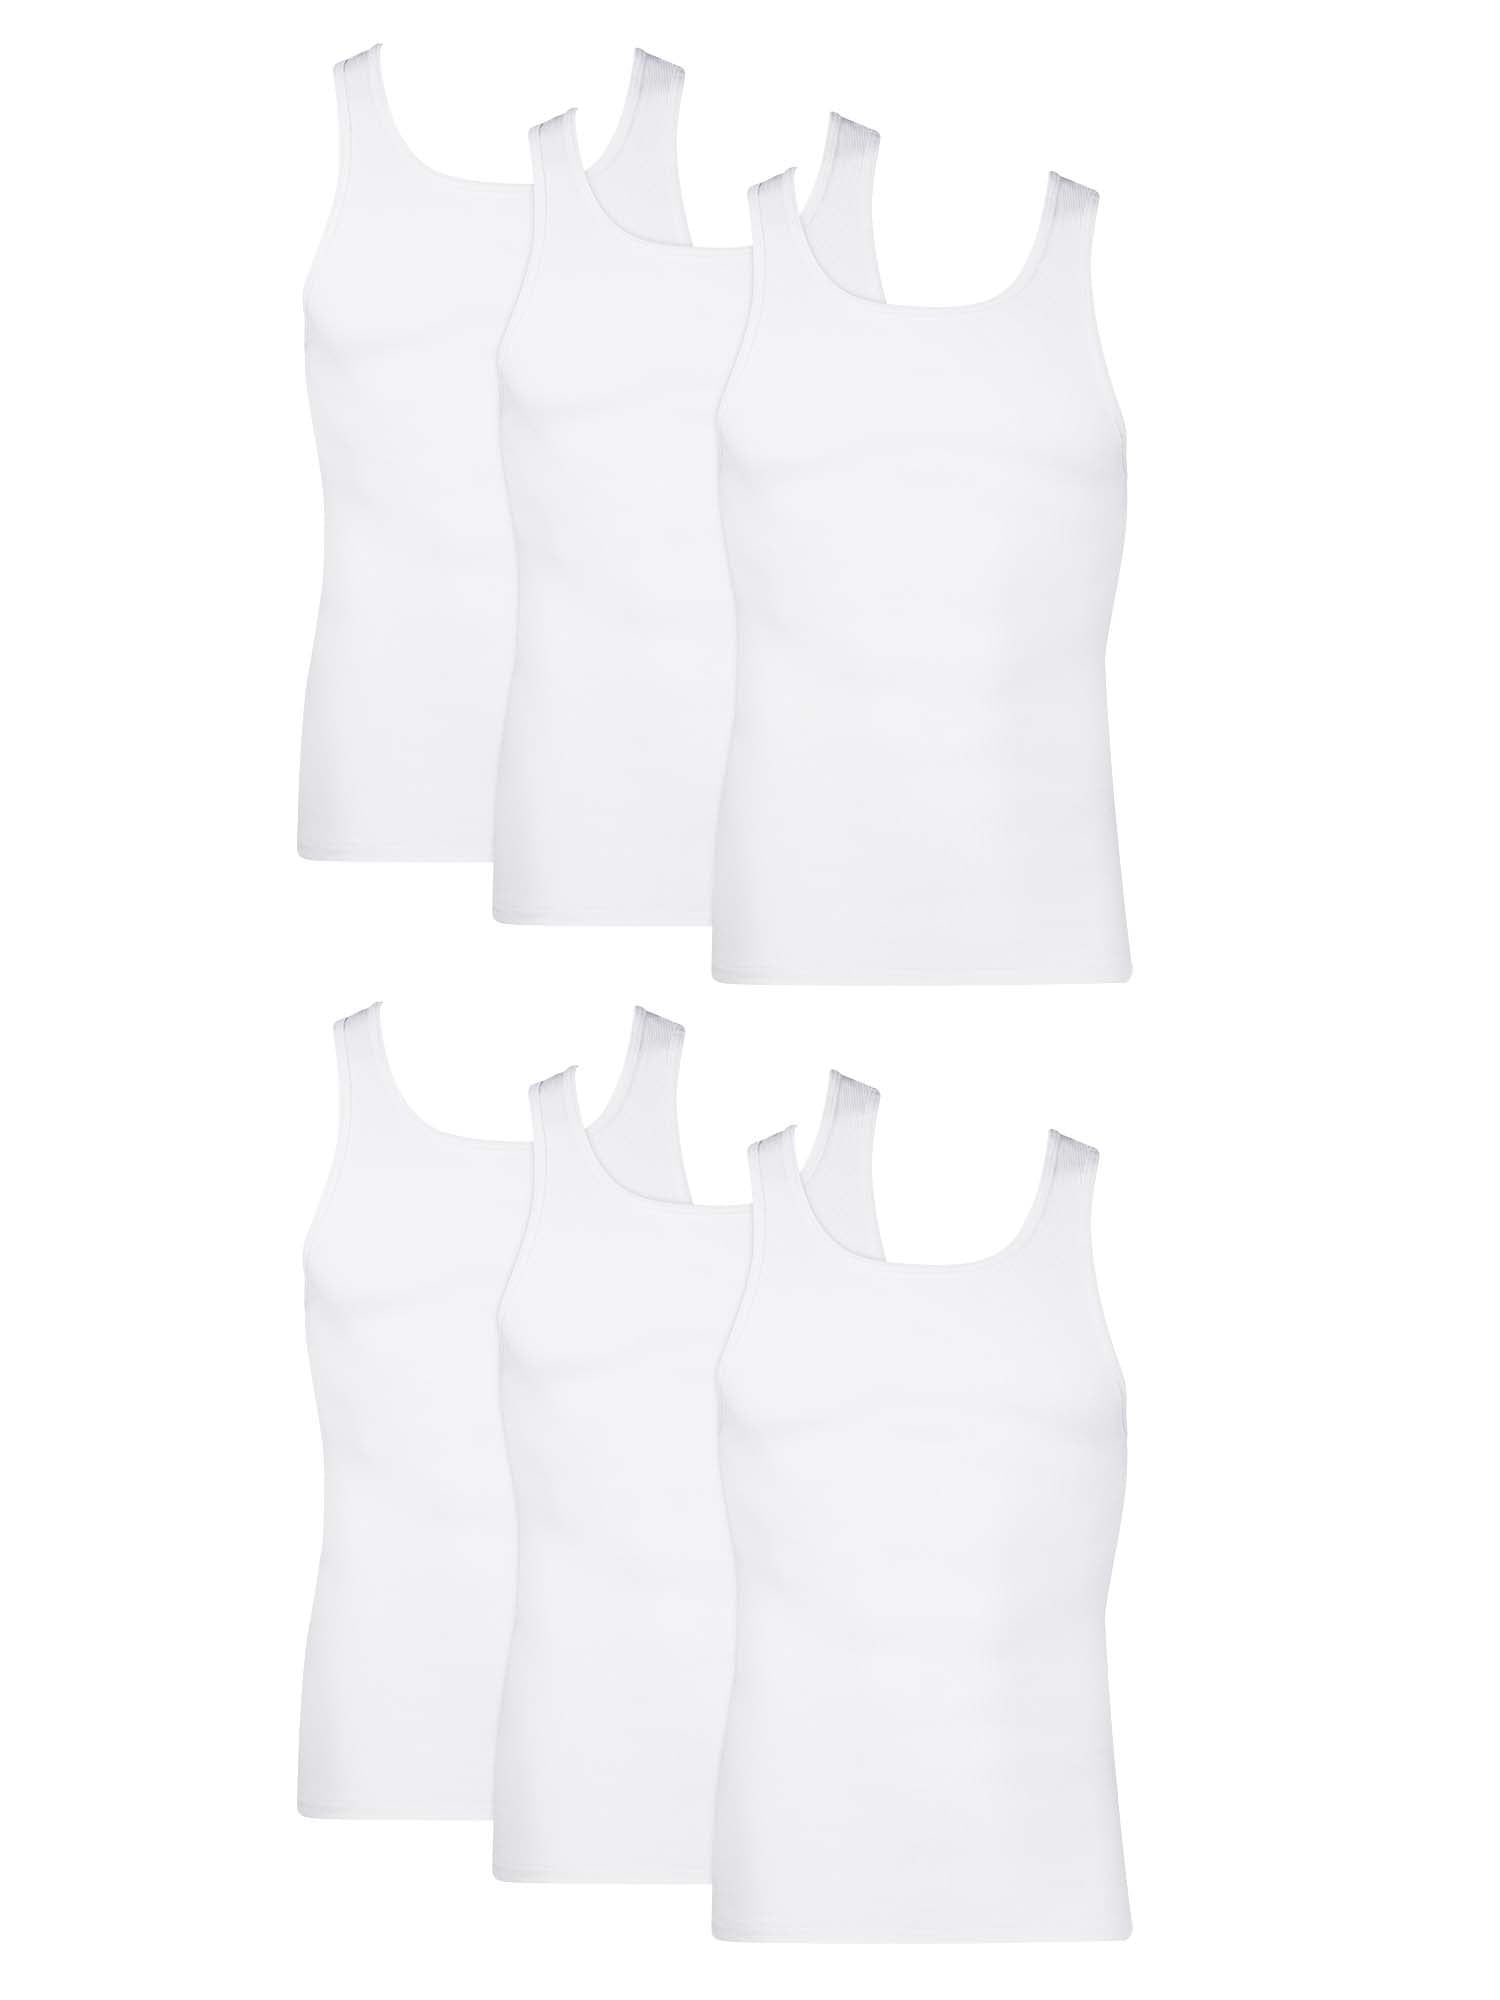 Hanes Undershirt, Ribbed Value Pack, Comfortable 100% Cotton Tank